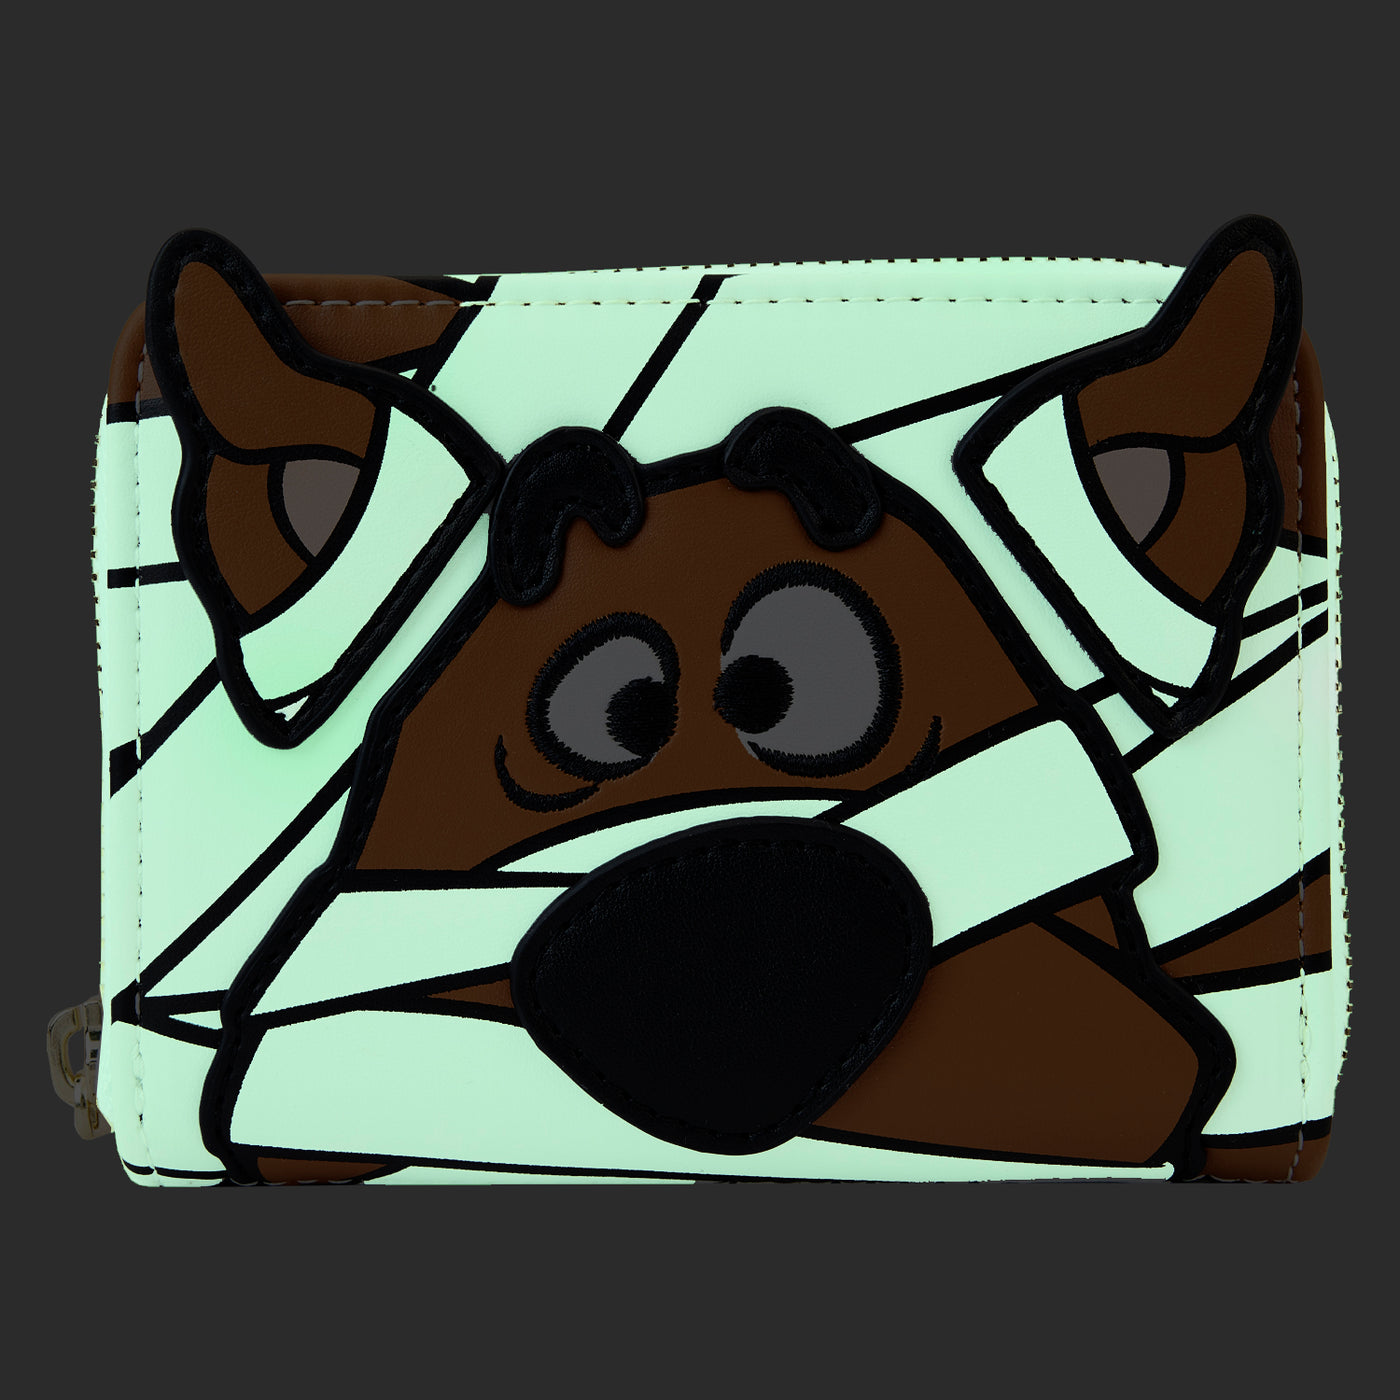 WB Scooby Doo Mummy Cosplay Wallet